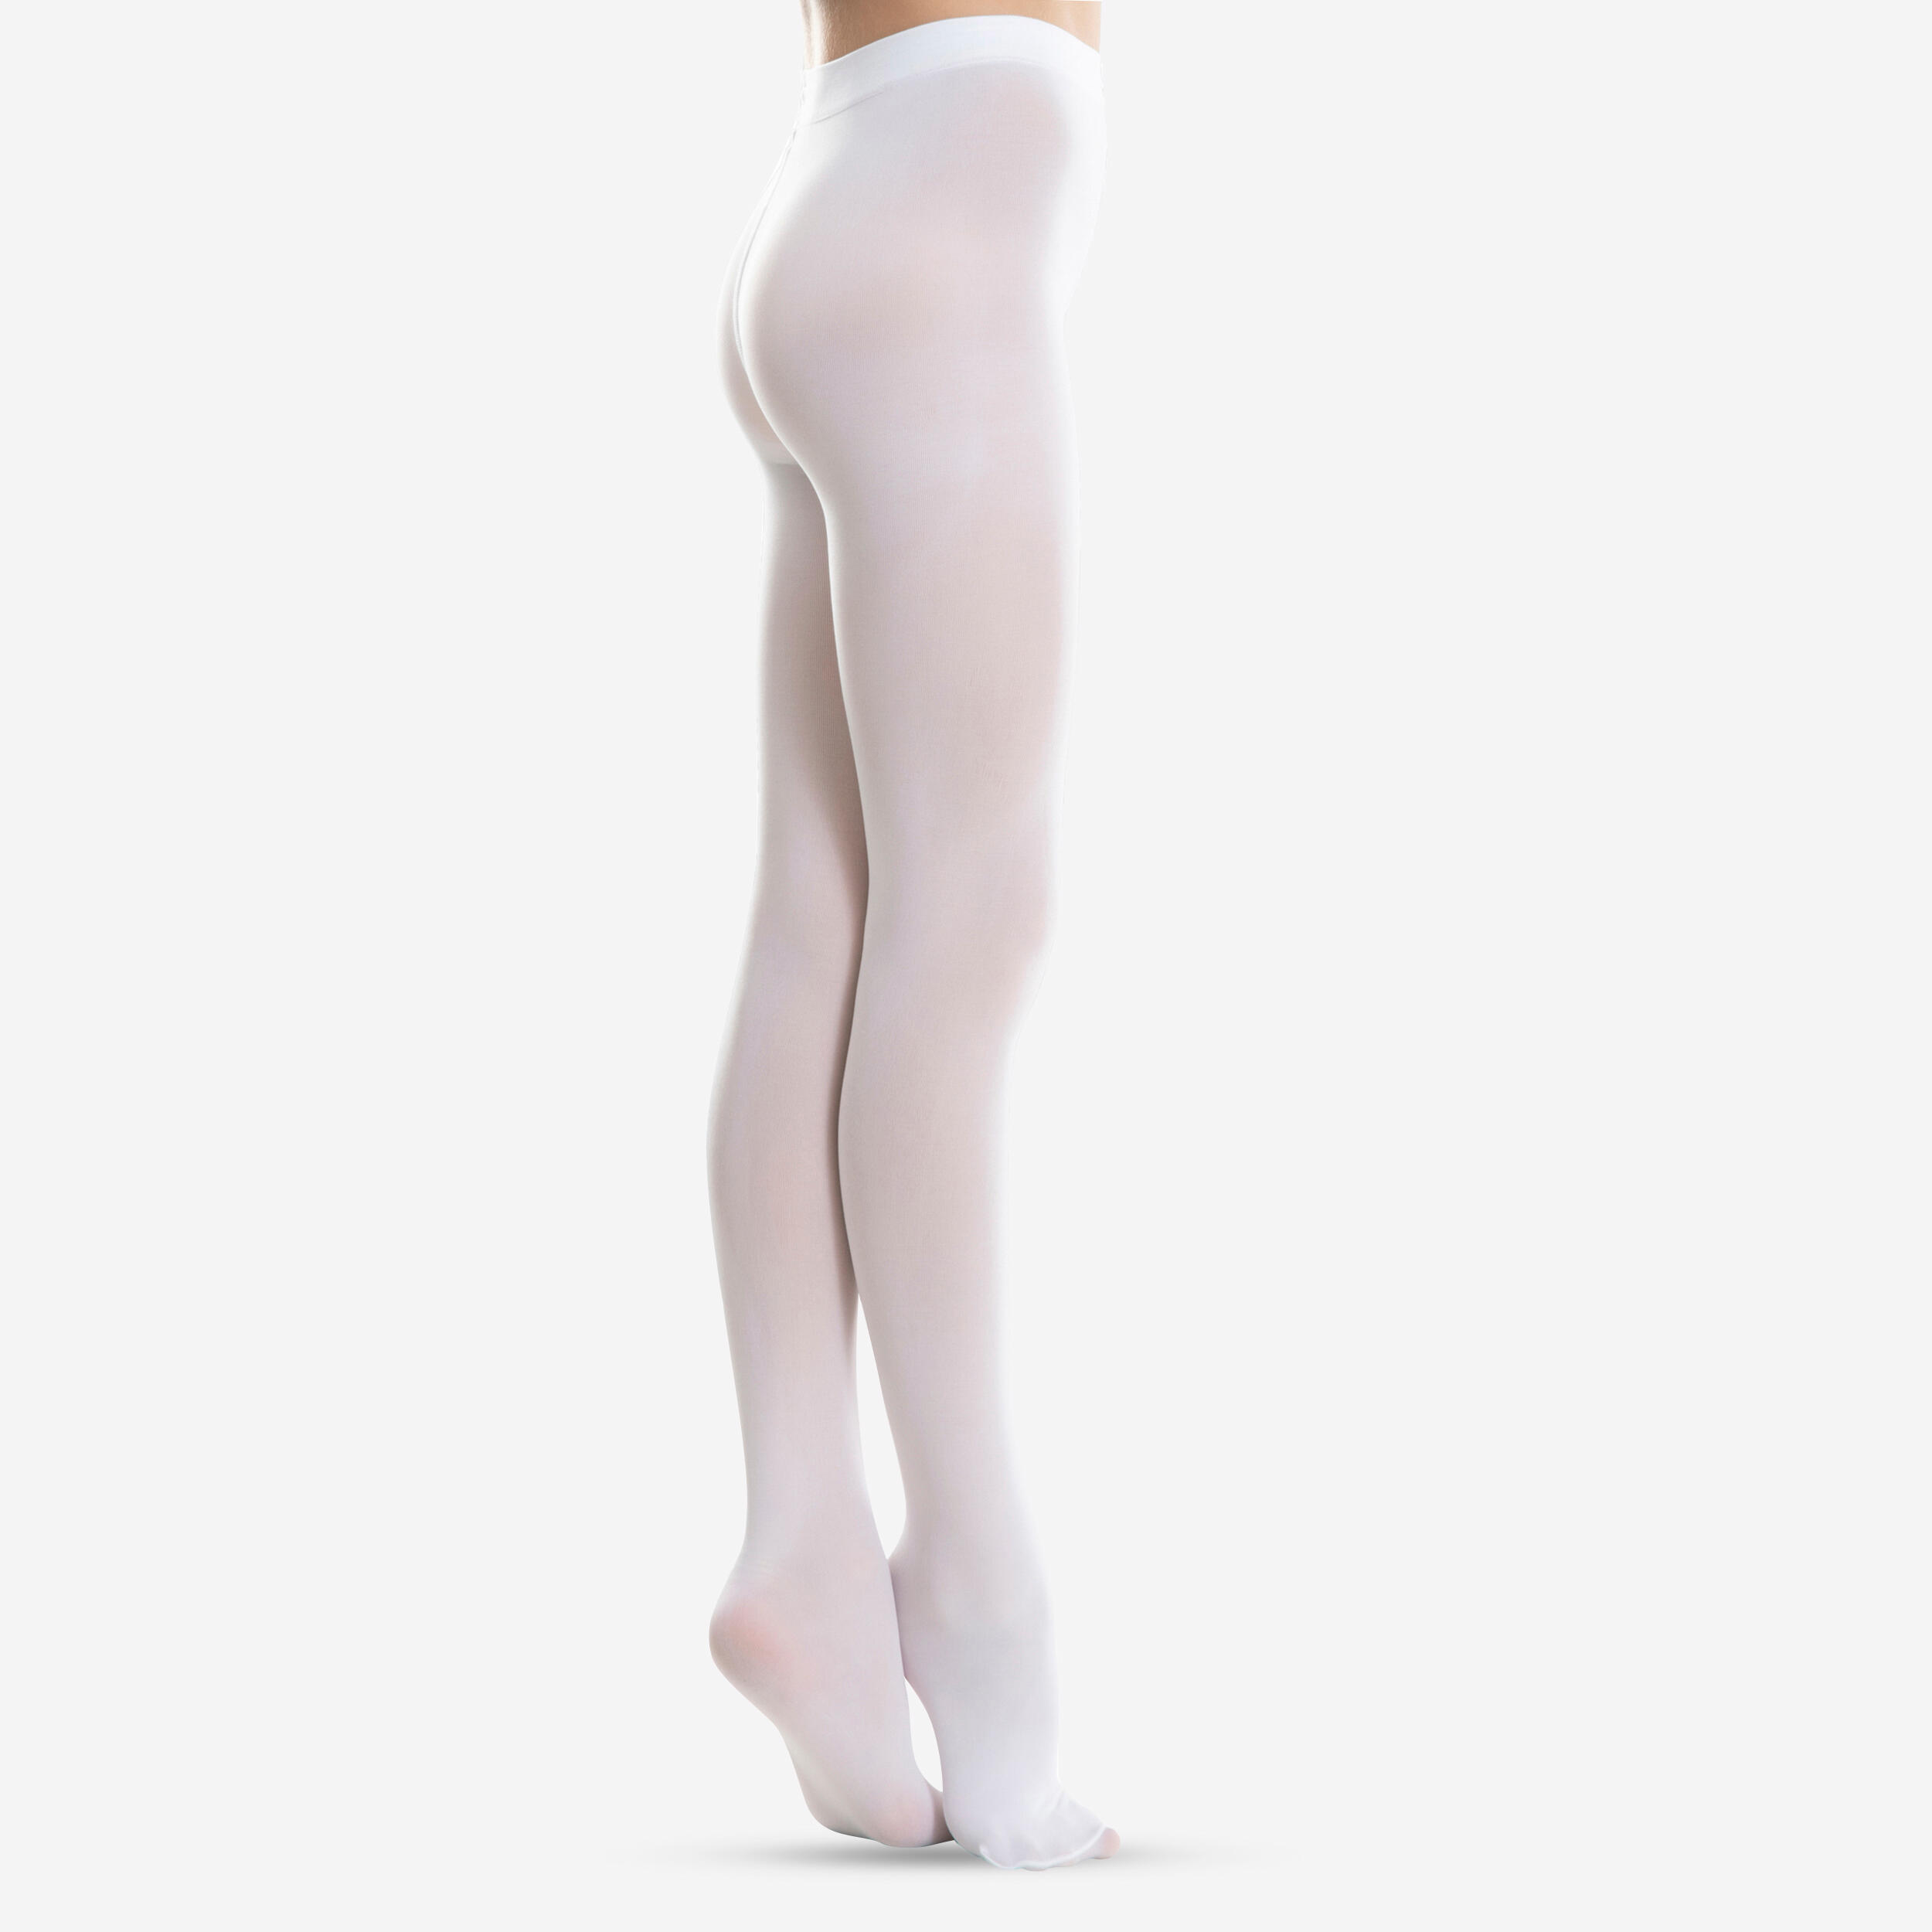 Tights for Dark Skin? Nude Tights For Dancers and Skaters. – My